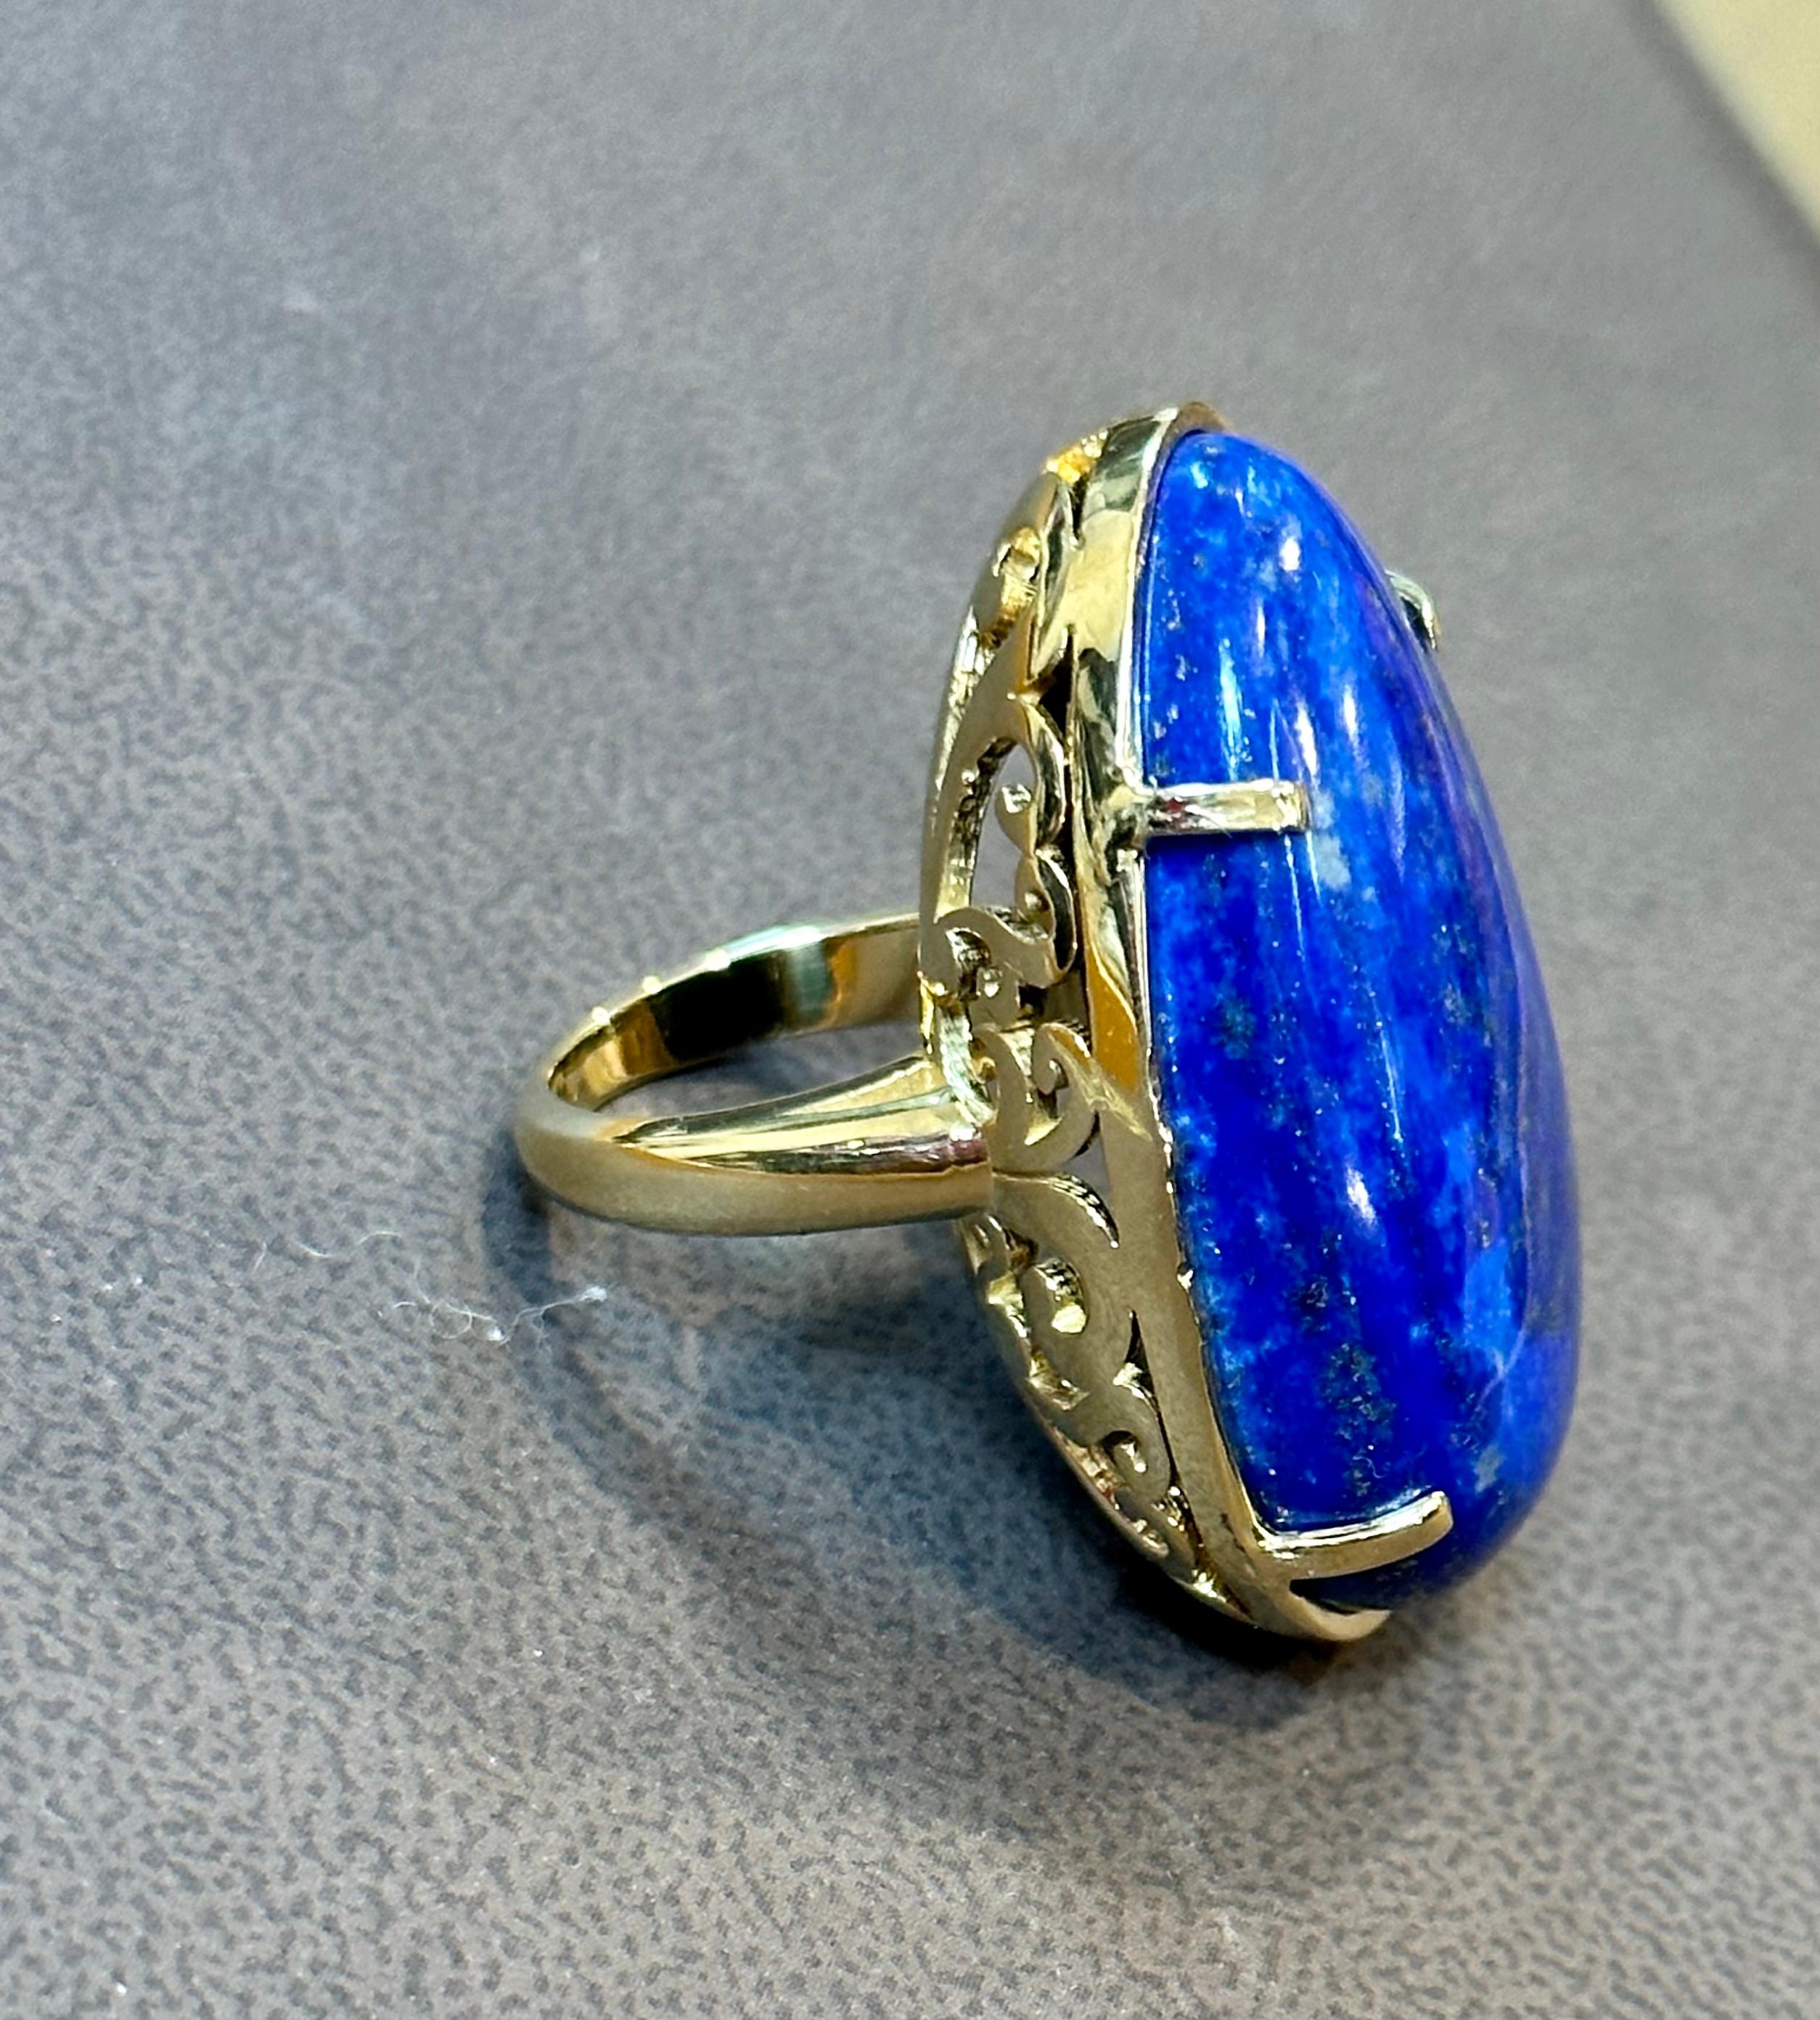 Vintage Beautiful  Filigree Ring in 14 Karat yellow gold 
This is a ring which has a 63 carat of high quality natural Lapis  Lazuli Cabochon , Vintage ring with beautiful filigree work around it 
Color , Cut and clarity is very nice.

14 K Yellow